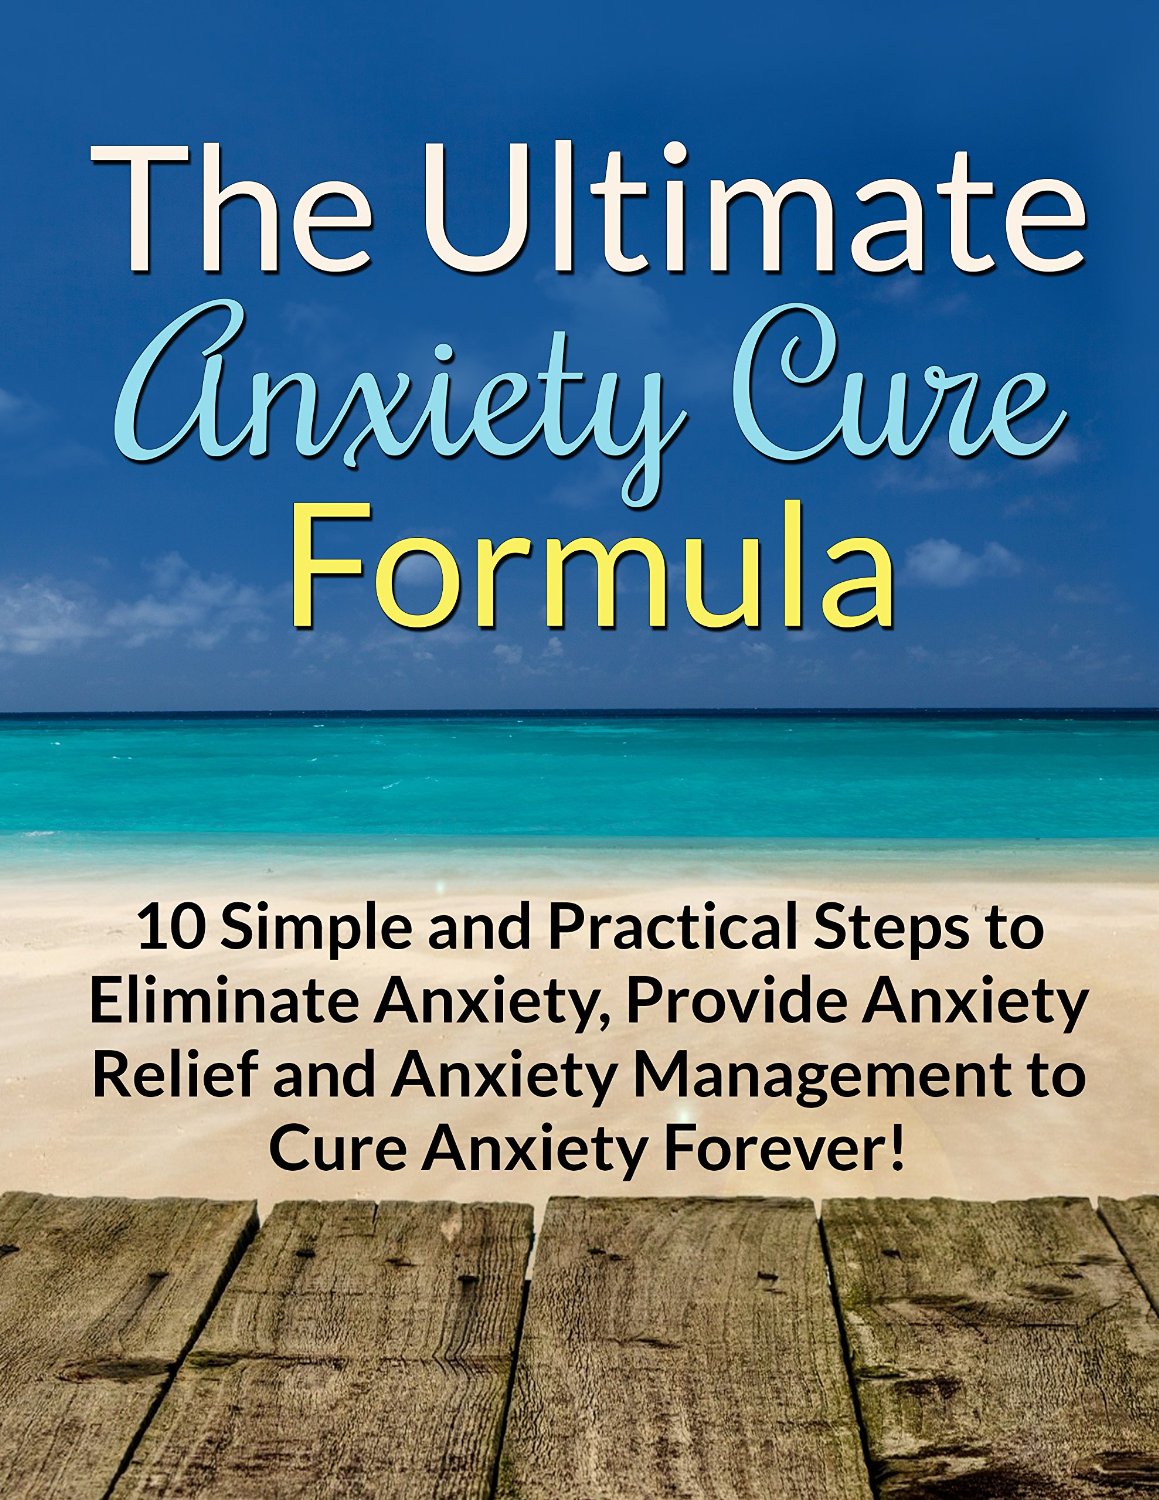 The Ultimate Anxiety Cure Formula: 10 Simple and Practical Steps to Eliminate Anxiety, Provide Anxiety Relief and Anxiety Management to Cure Anxiety Forever! by William Frederick Cohen